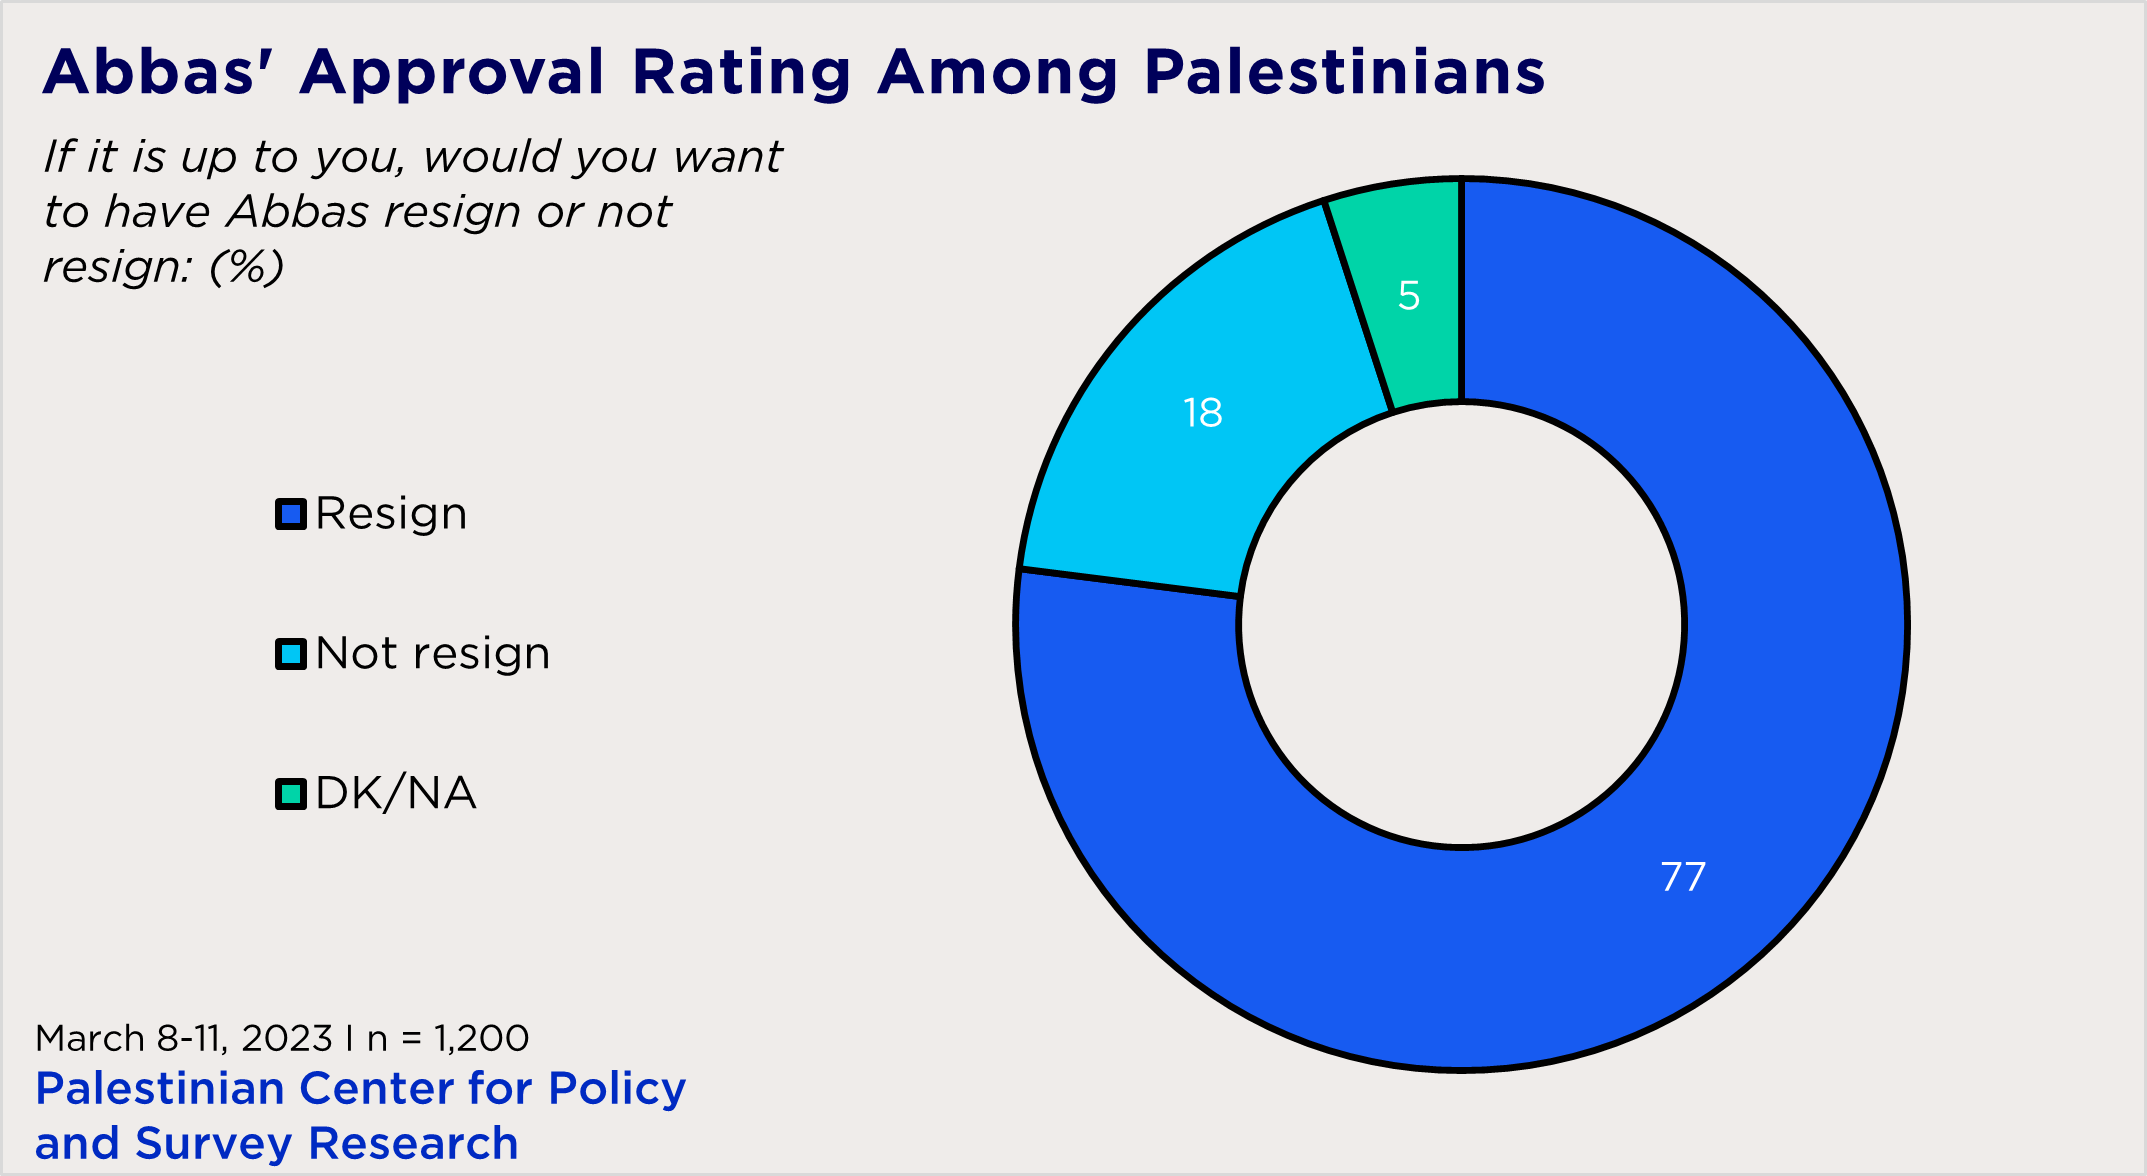 "pie chart showing views on whether Abbas should resign or not"